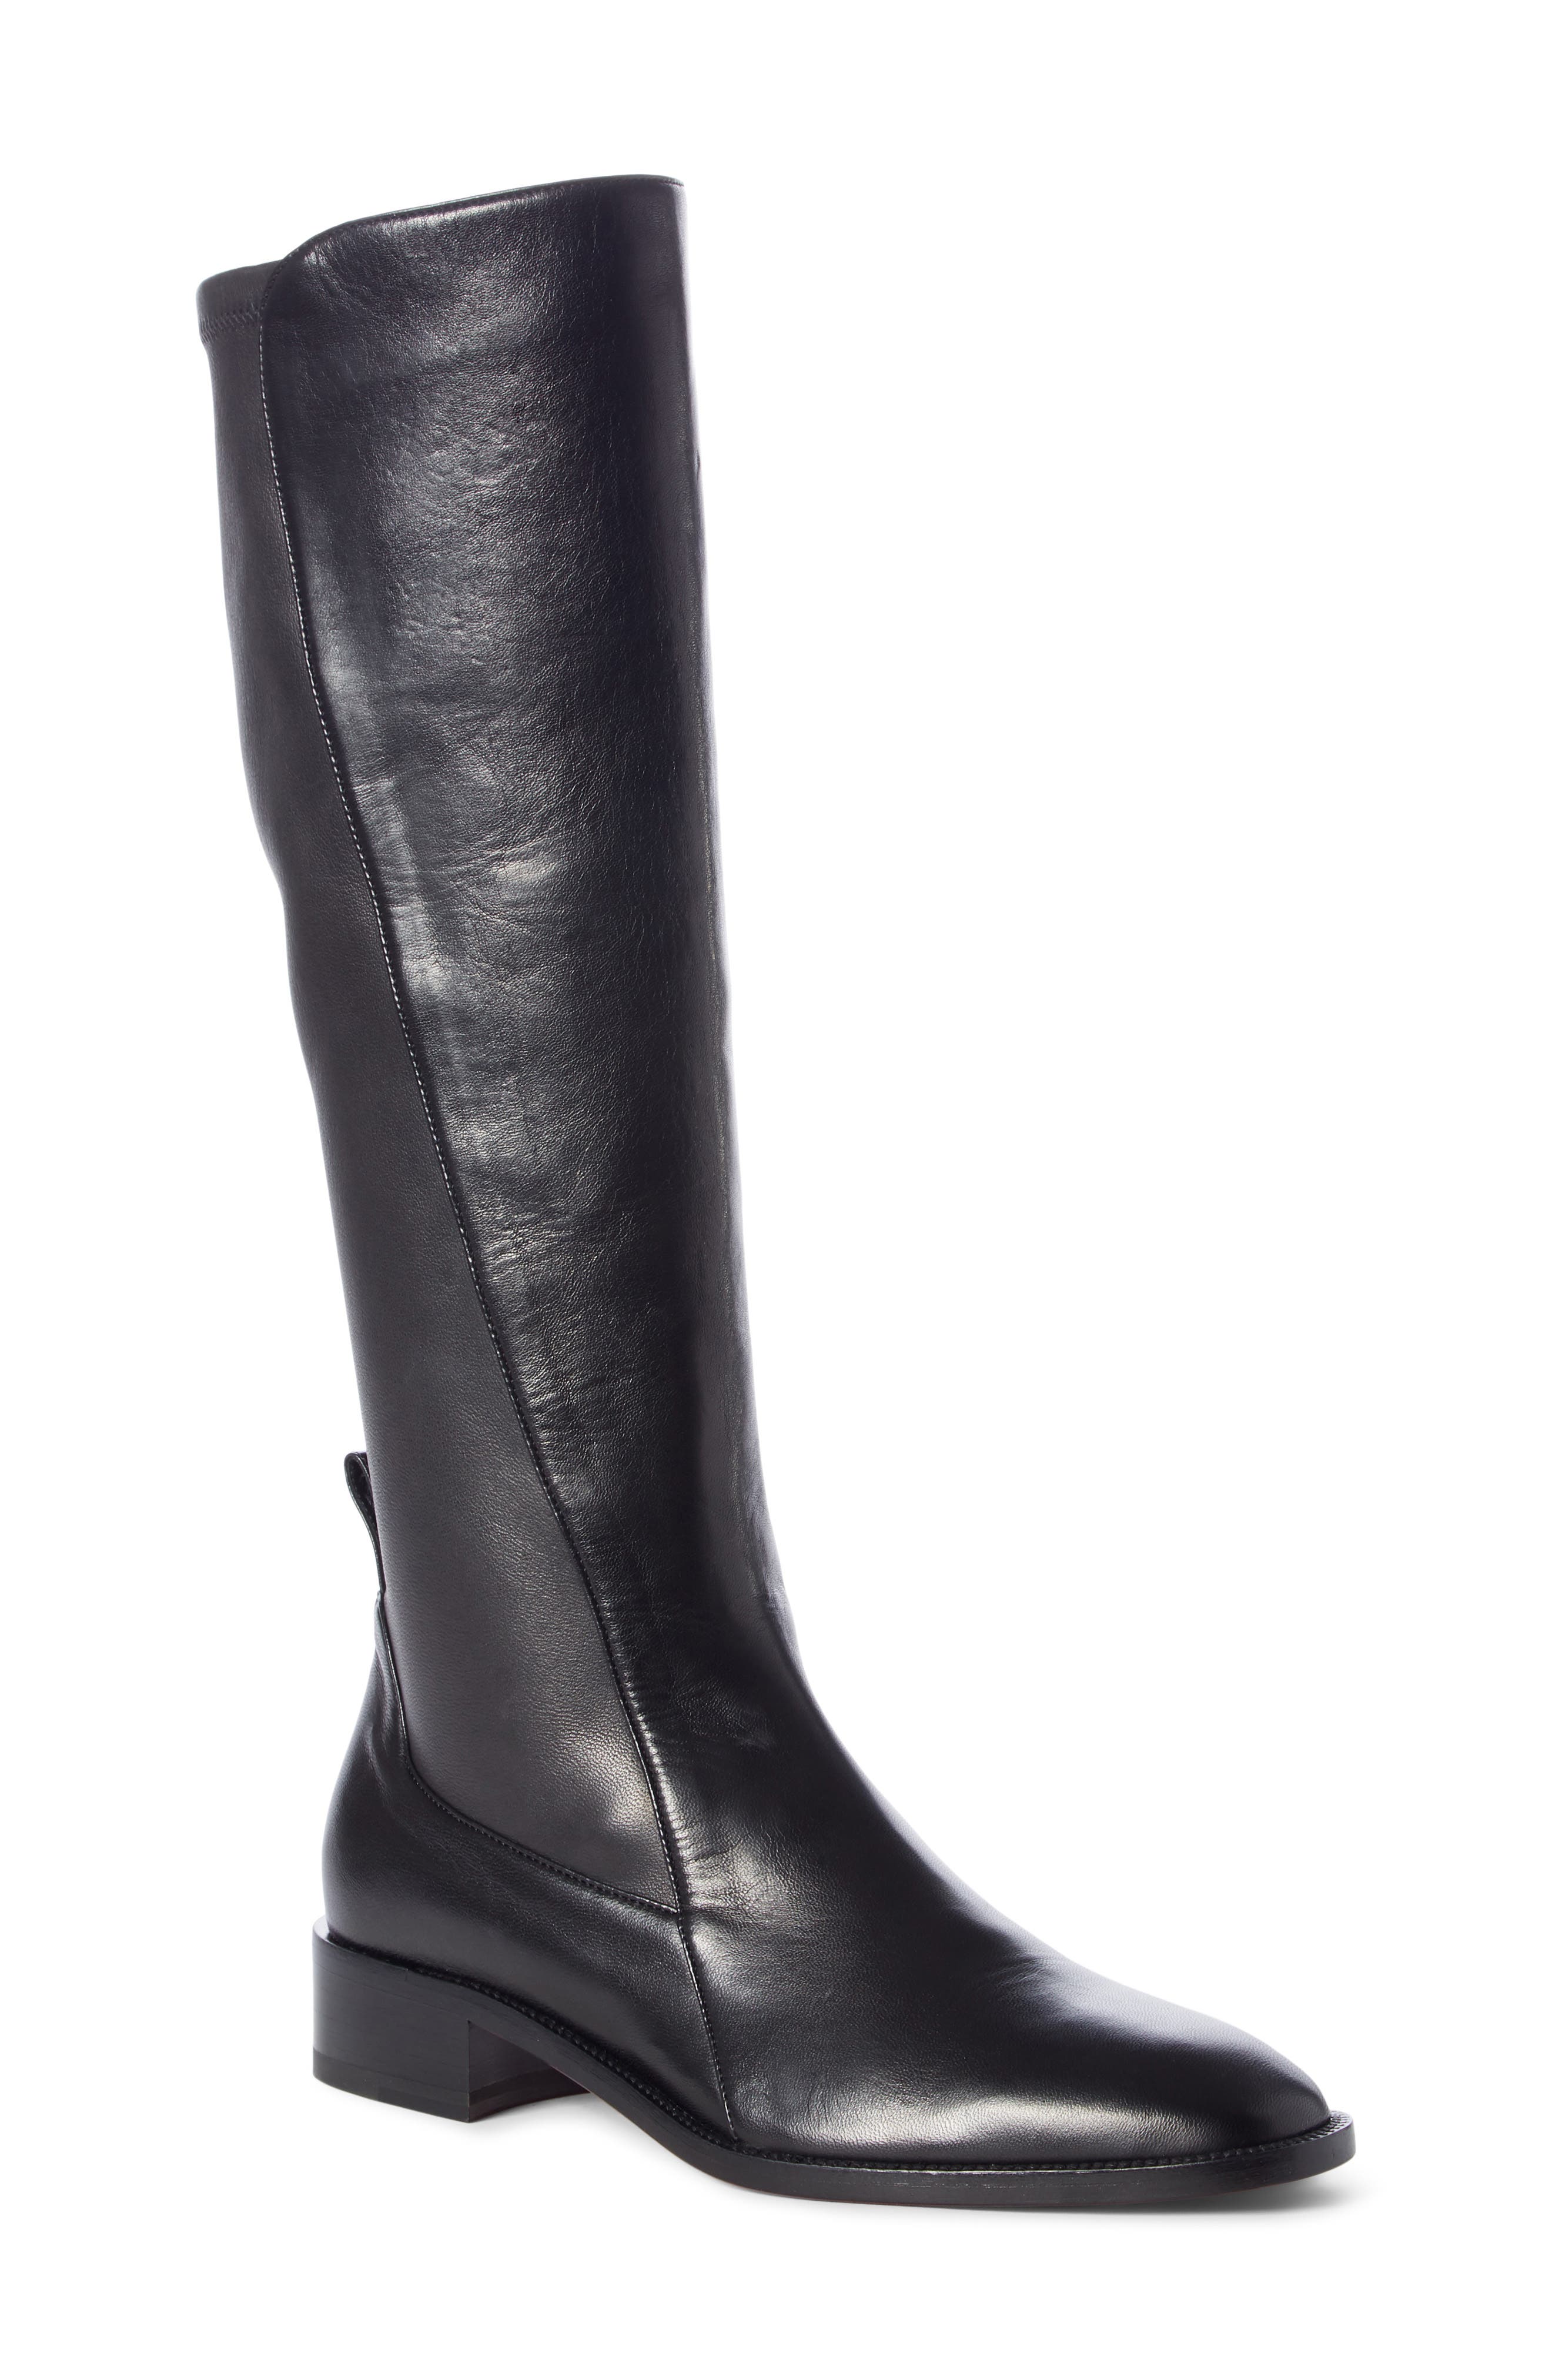 louboutin riding boots